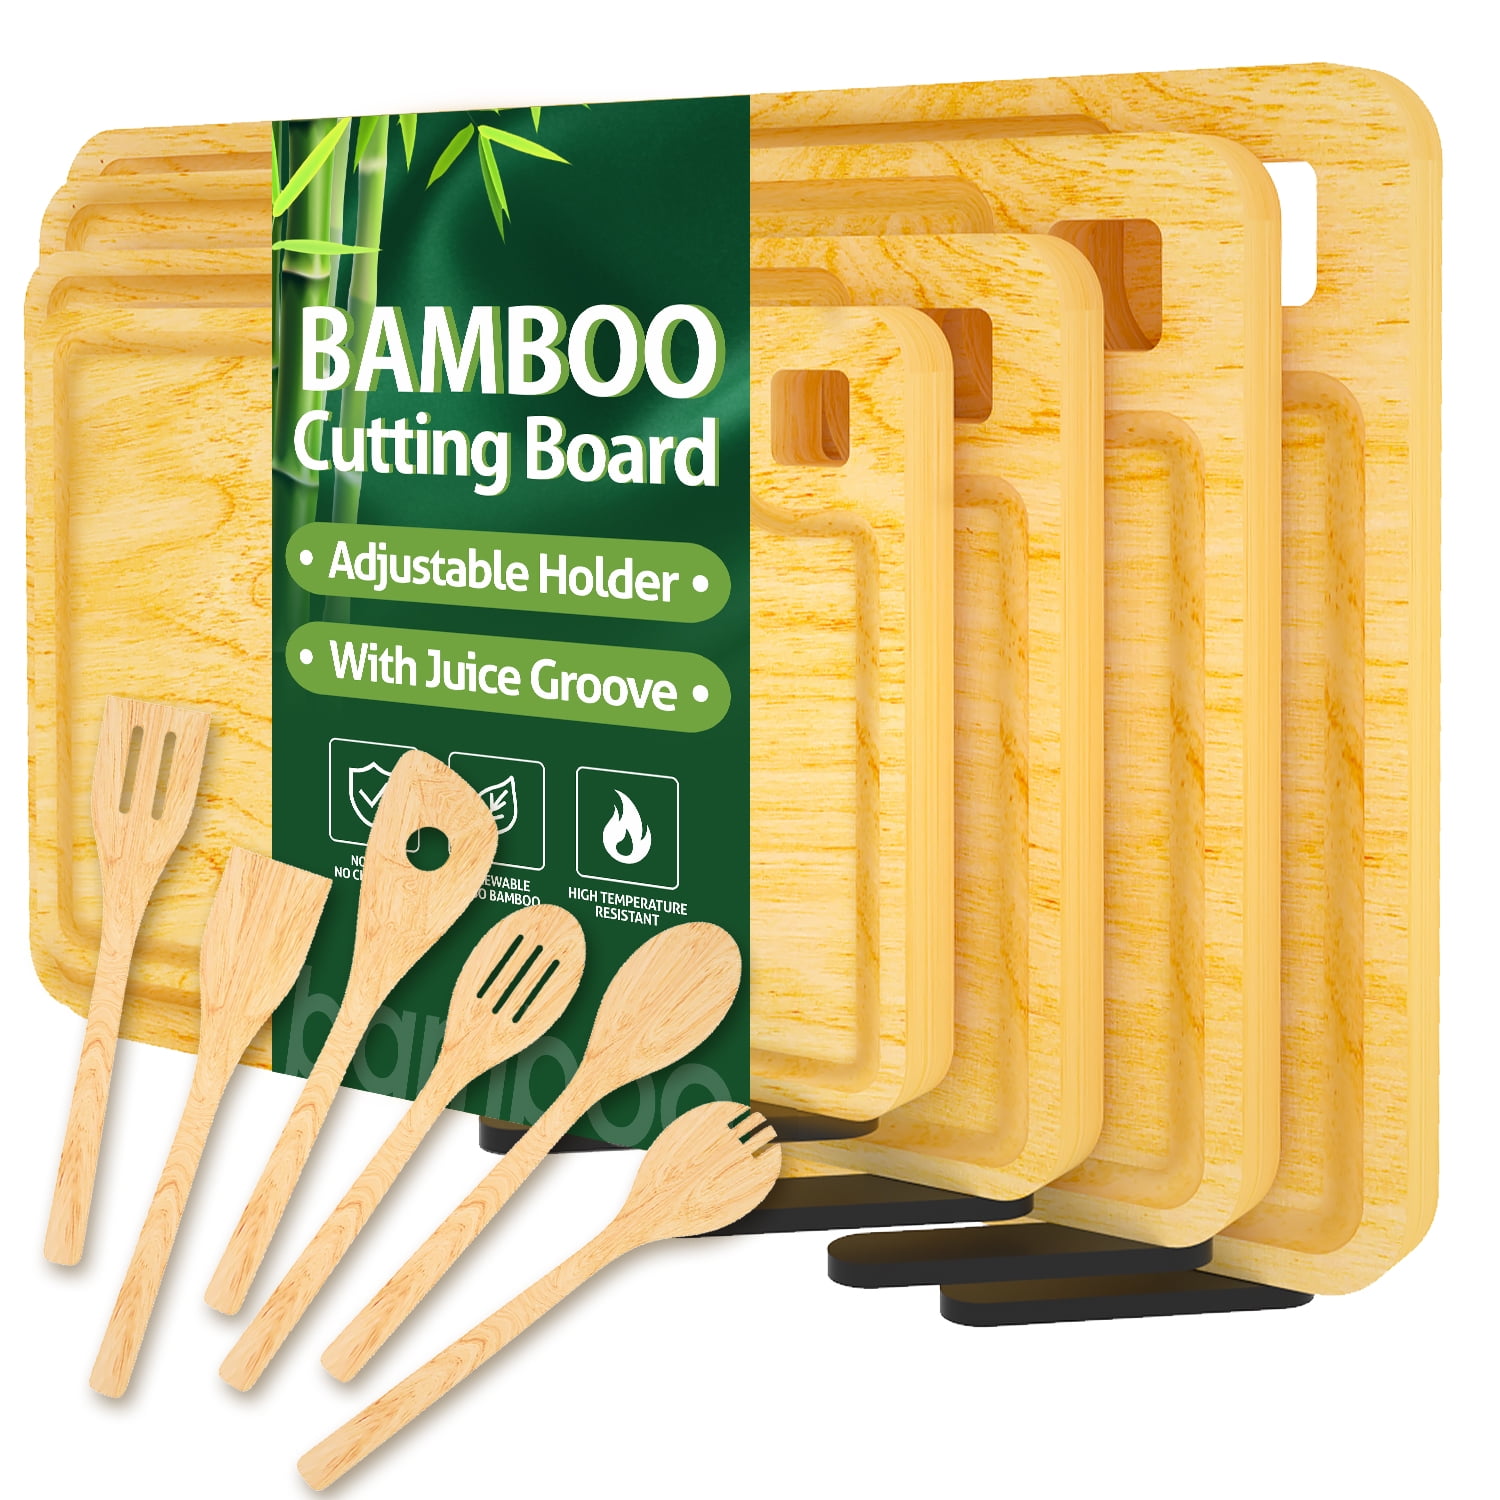 Bamboo Cutting Boards for Kitchen, Wood Cutting Board with Holder, Bamboo Cutting Board Set Reversible with Juice Grooves for Meat Cheese Fruit and